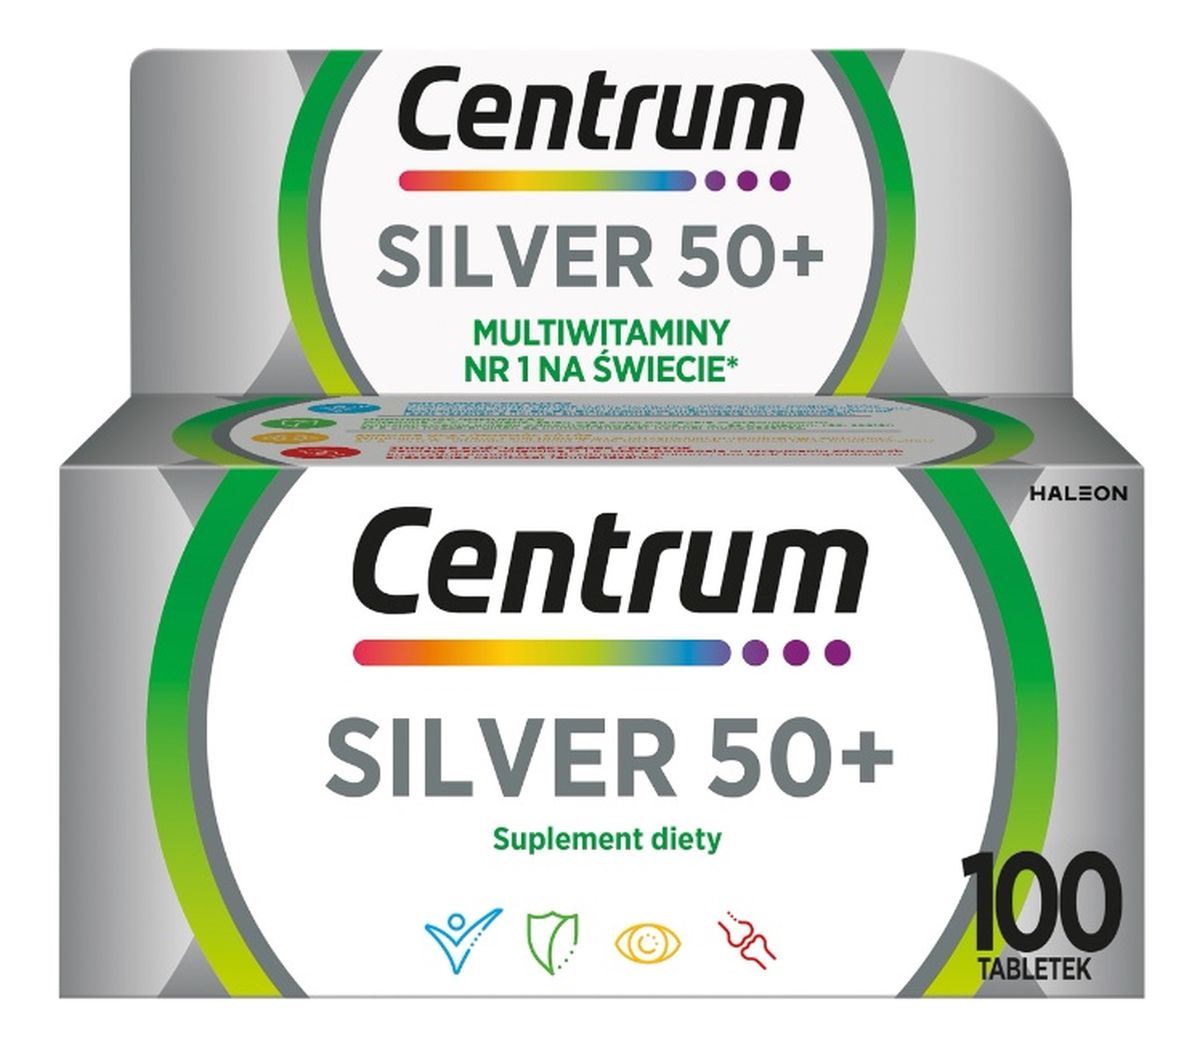 Silver 50+ multiwitaminy suplement diety 100 tabletek